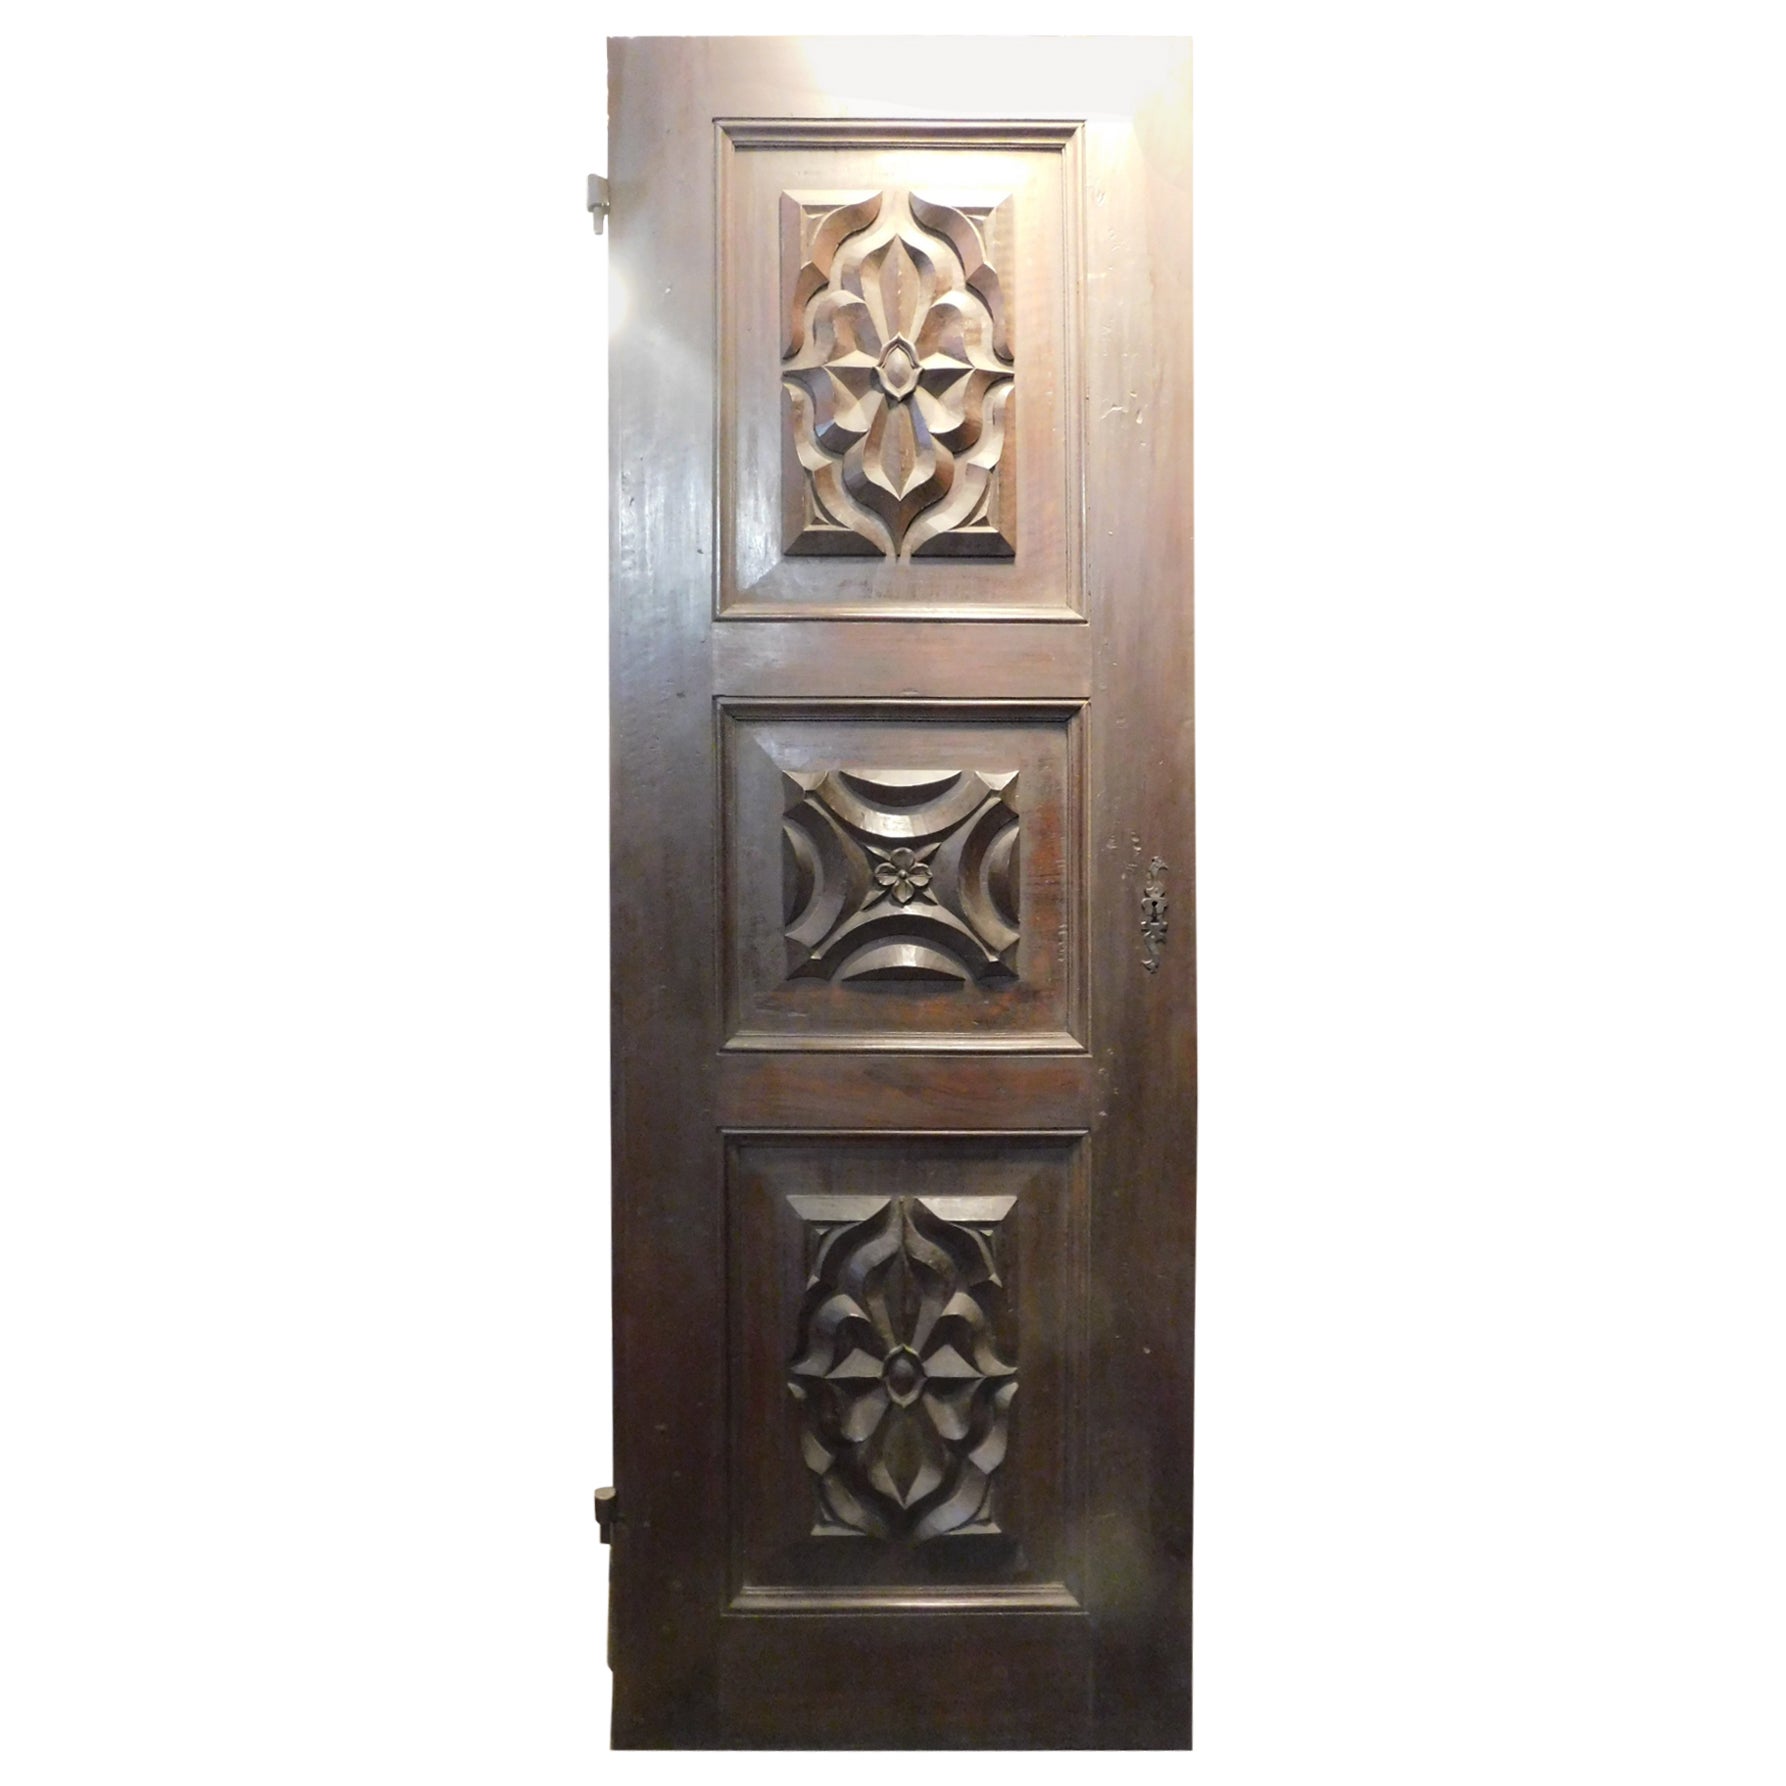 N.4 atique walnut doors, richly hand-carved, Italy For Sale